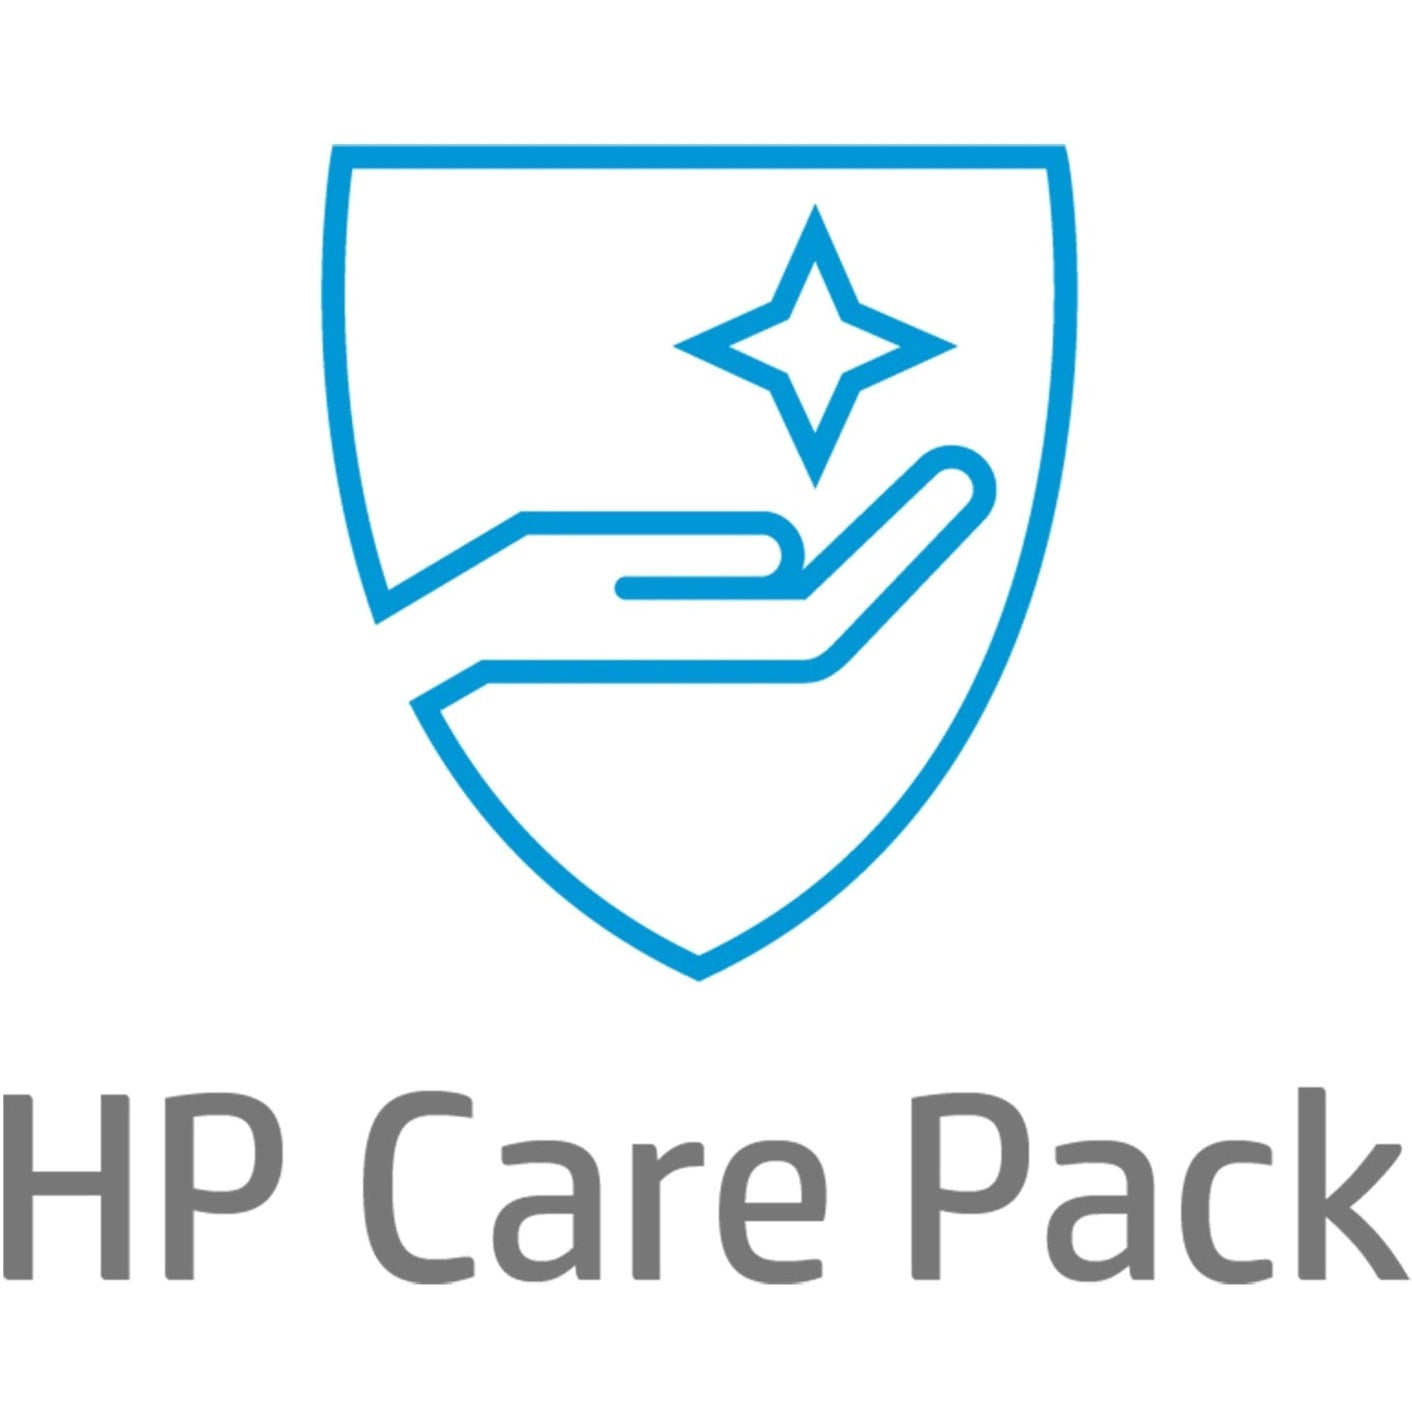 HP Care Pack - Extended Service - 3 Year - Service (U9EE4E)